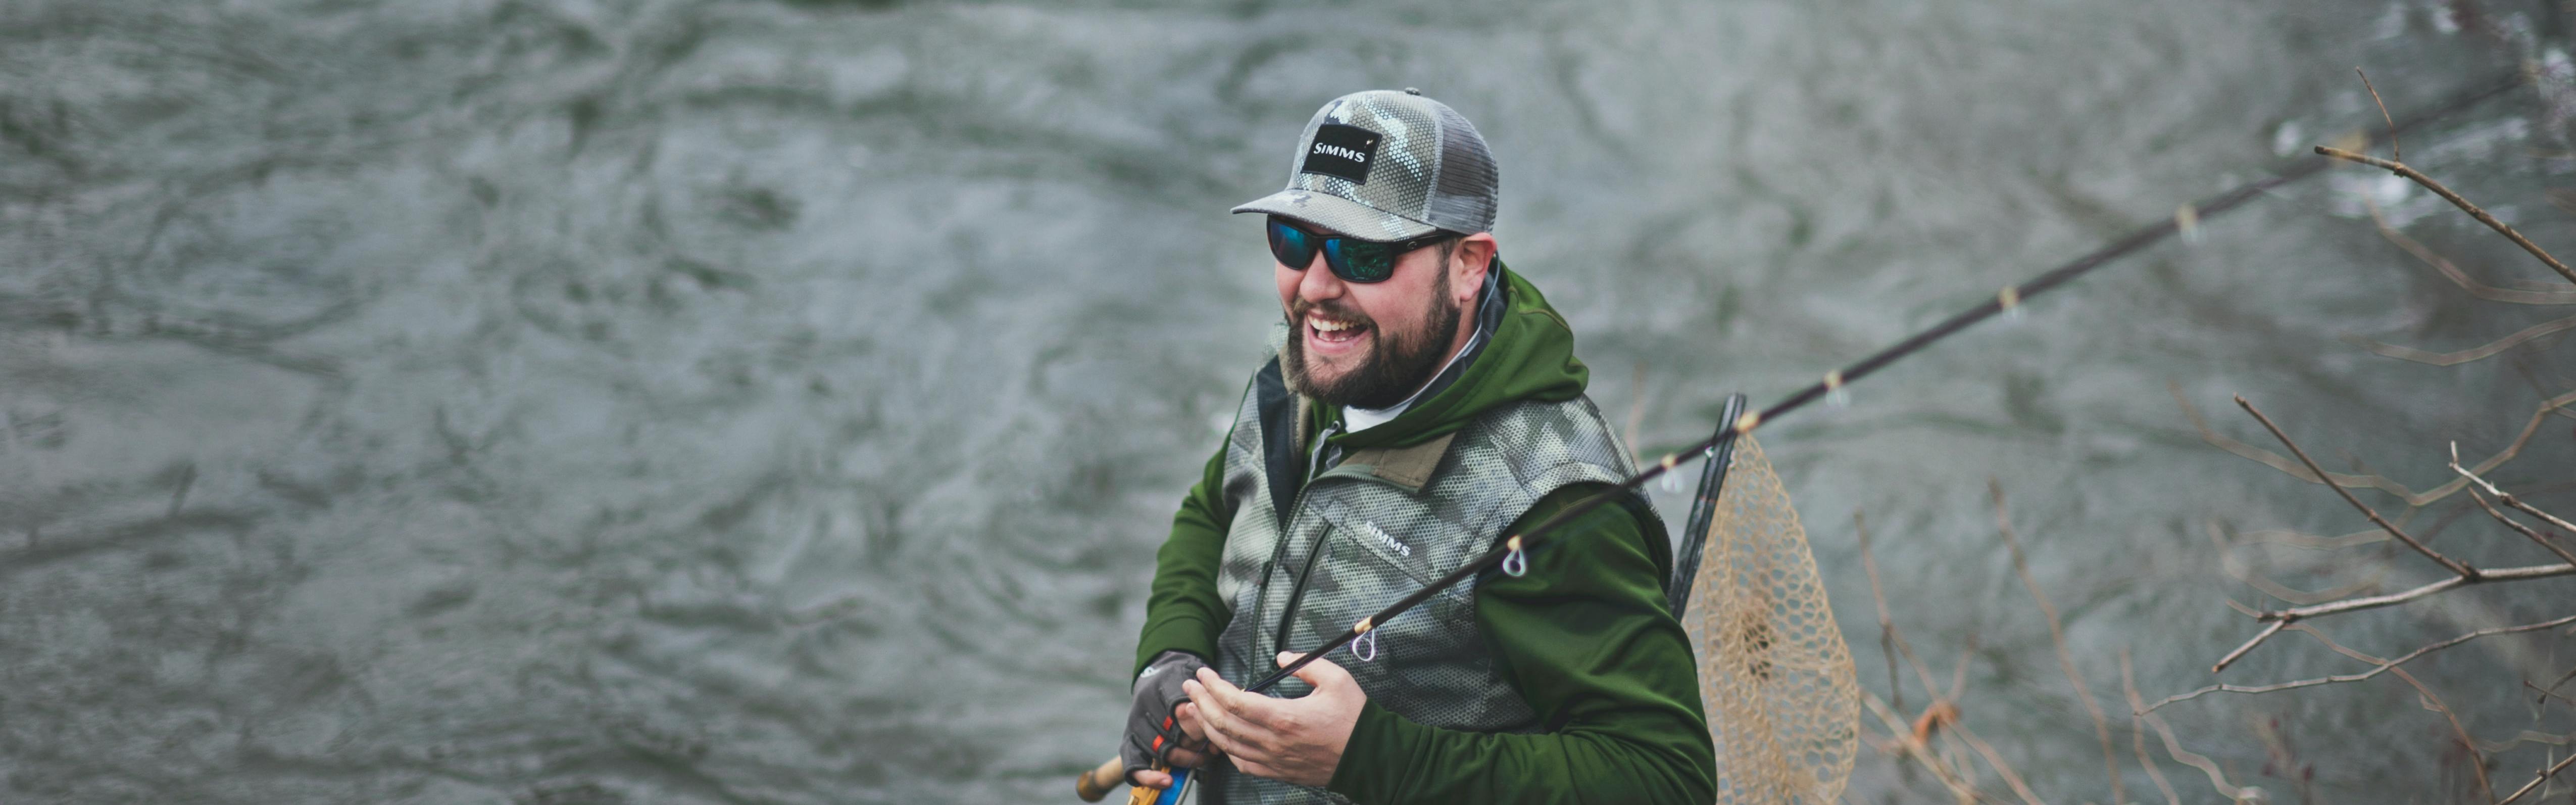 31 Pros and Cons of Fly Fishing Packs - Setup to Use